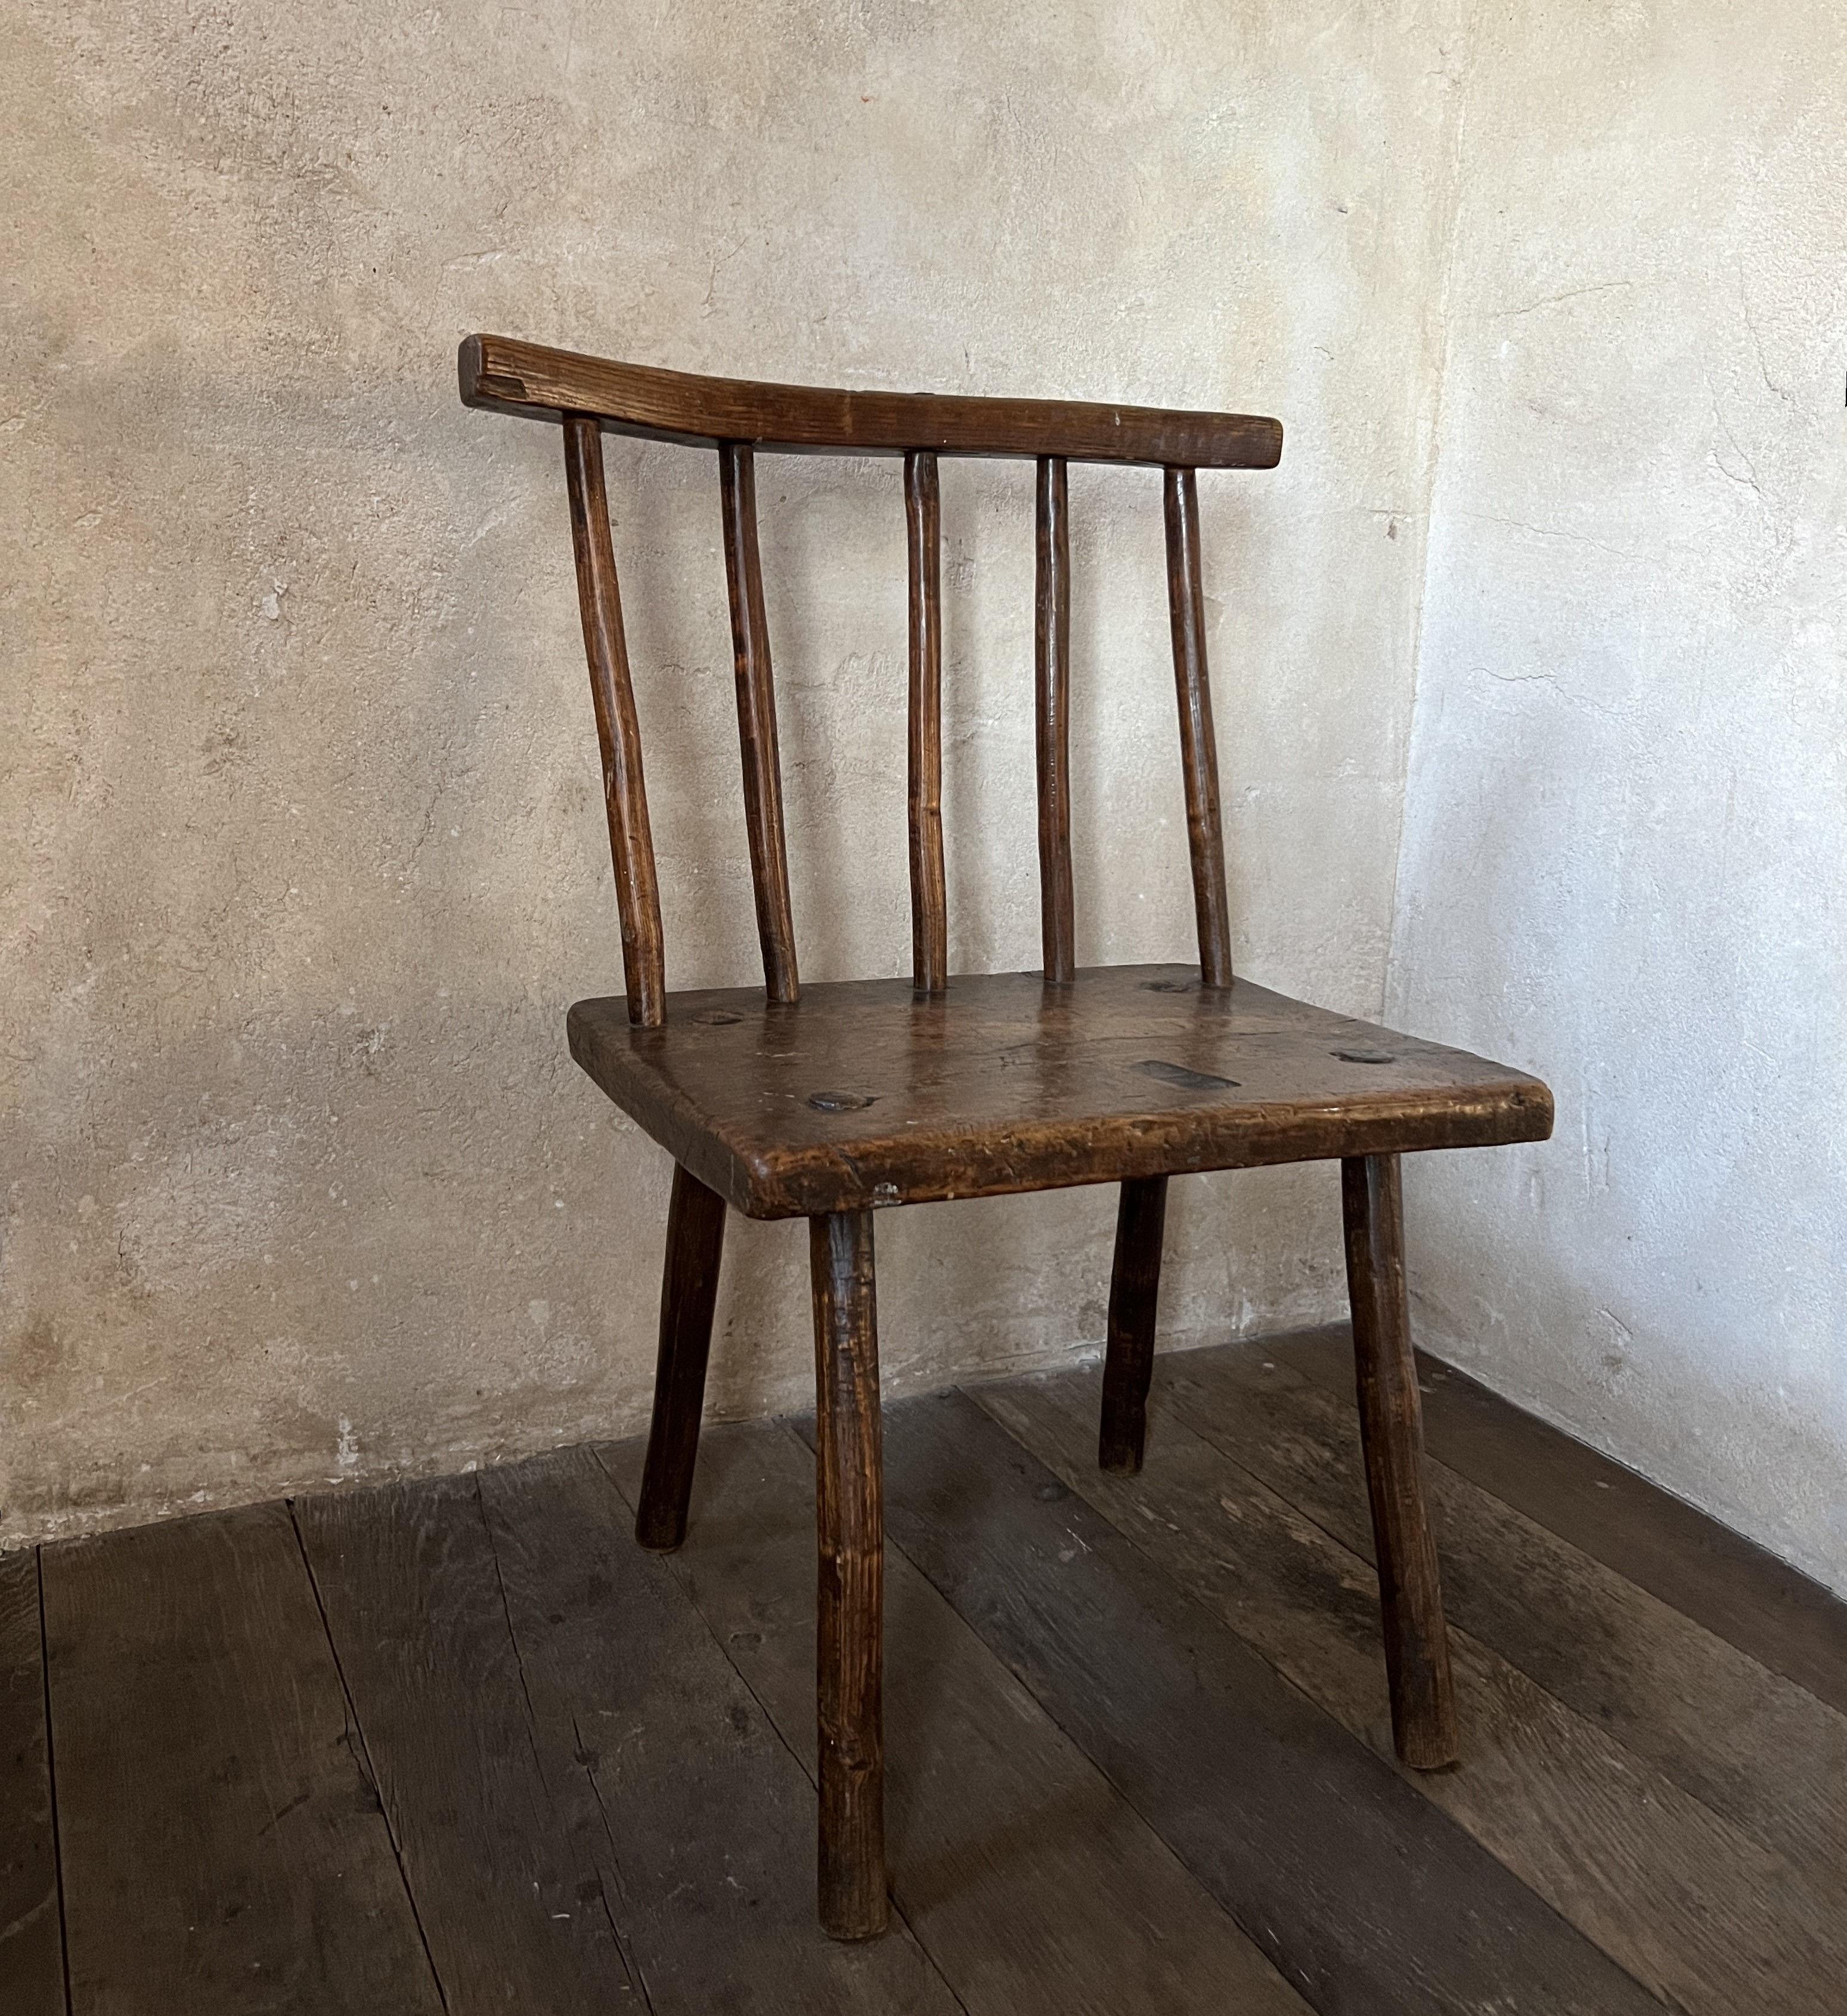 A verry original 19th century Welsh stick back chair. Made from elm with a solid one slab seat. Beautiful patina, primitive organic look but sturdy and ready for everyday use. 